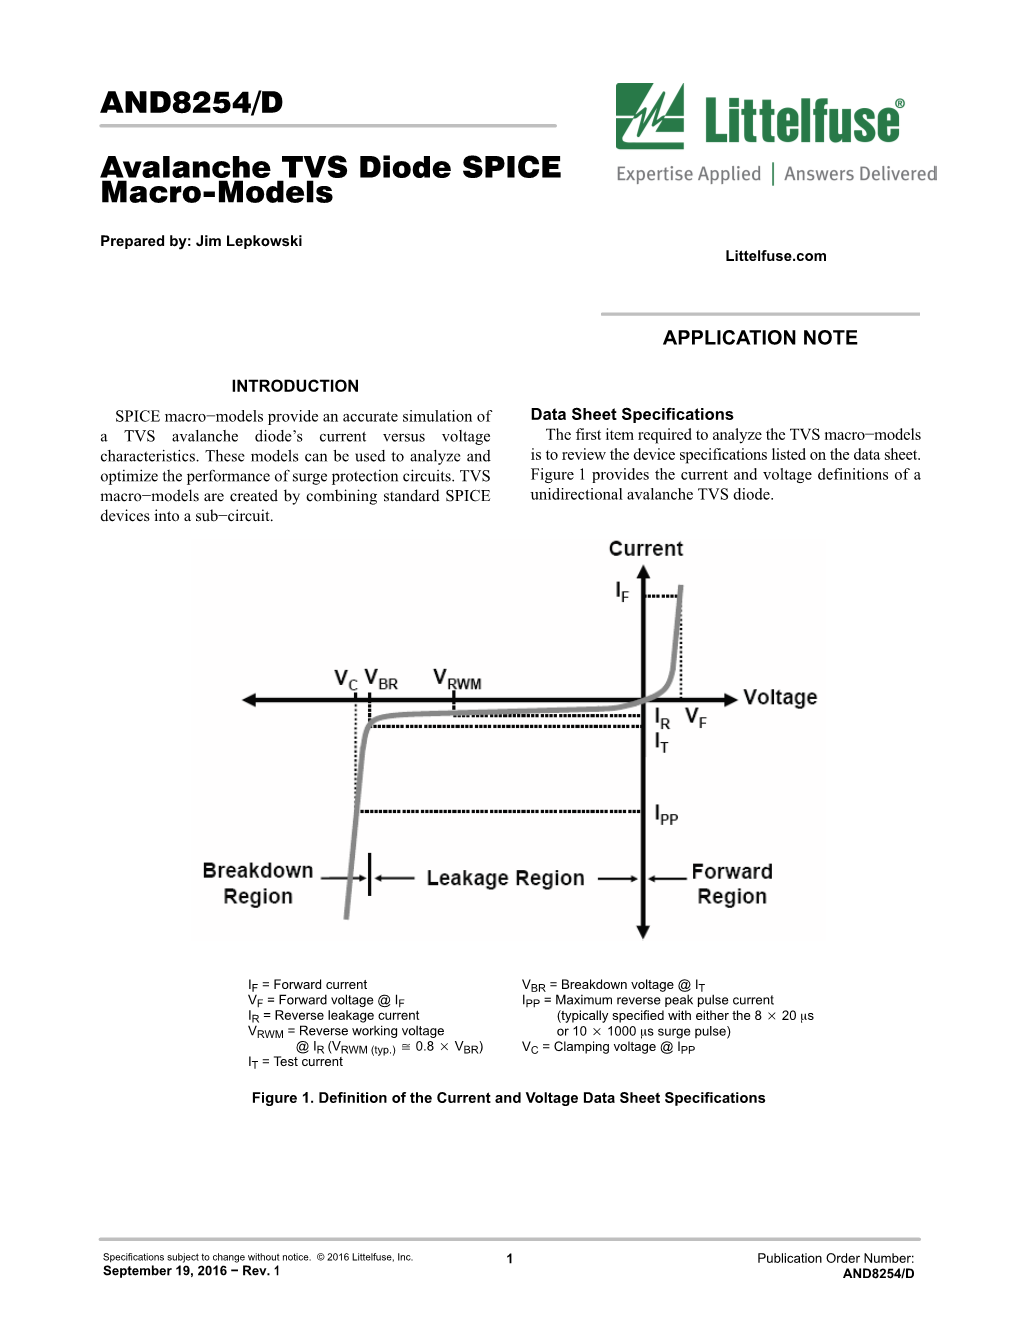 Avalanche TVS Diode SPICE Macro-Models